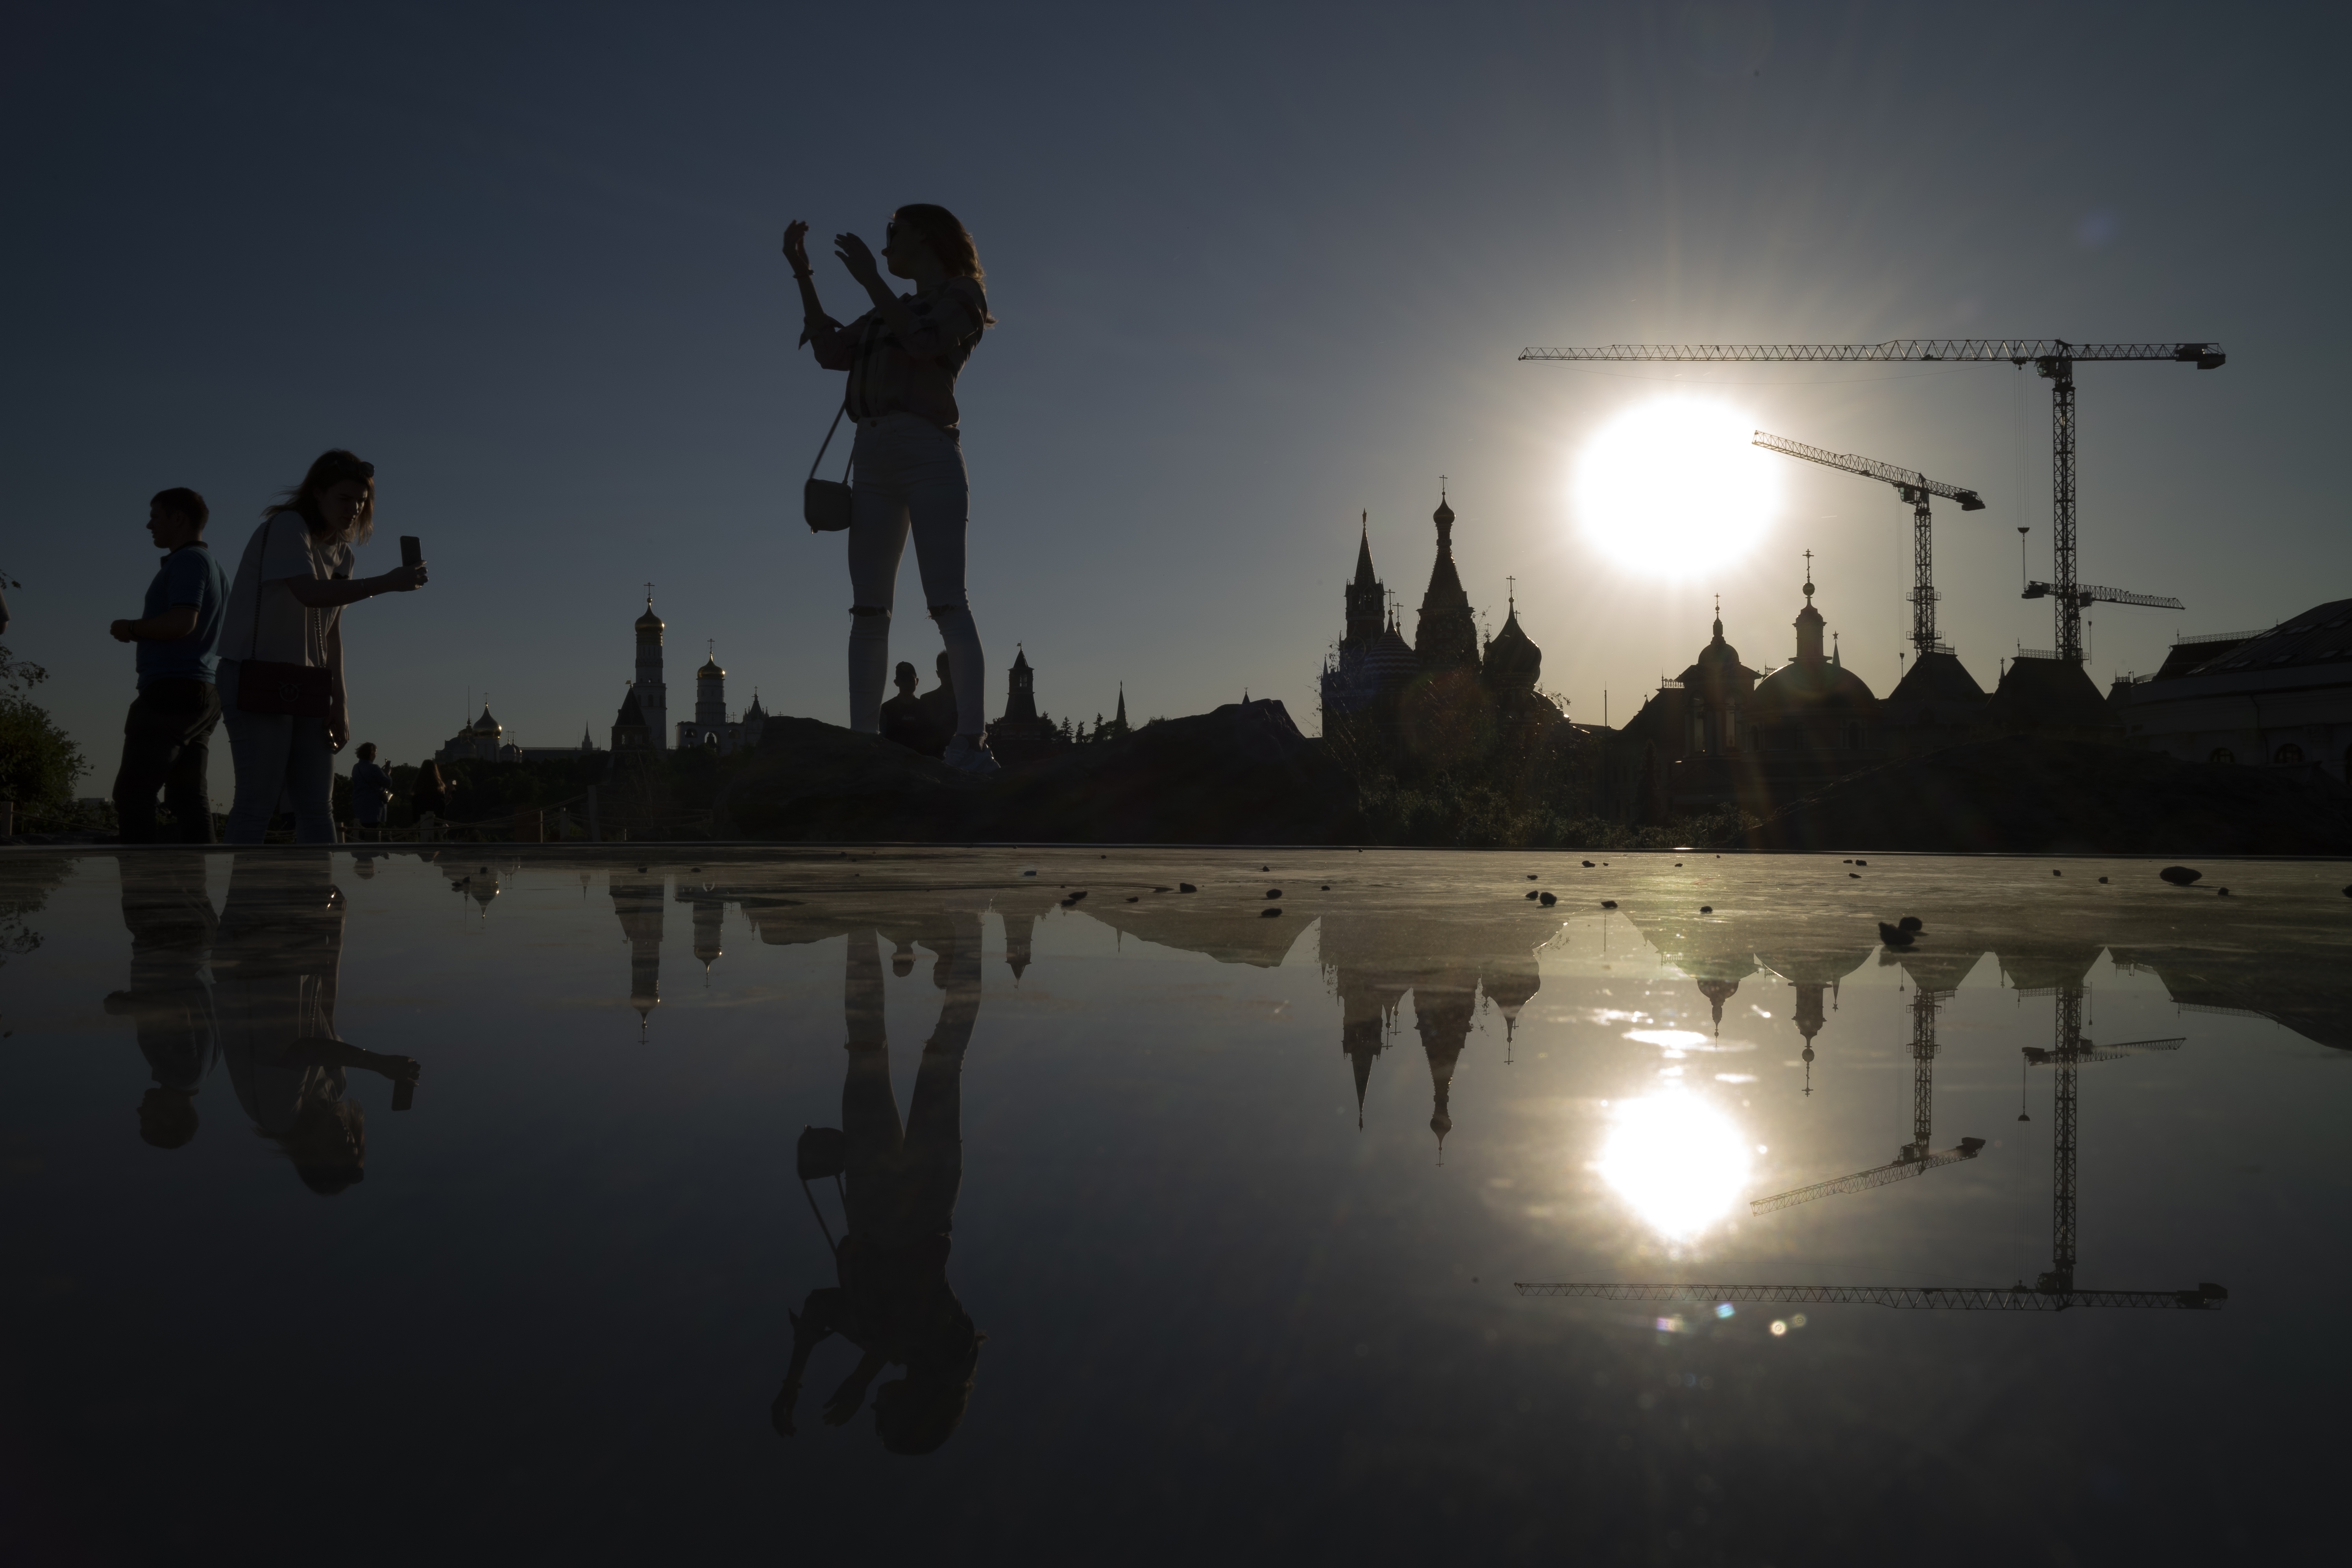 A woman poses for a photo at Zaryadye Park with the Kremlin in the background during a sunset in Moscow, Russia, Saturday, May 18, 2019. (AP Photo/Alexander Zemlianichenko)